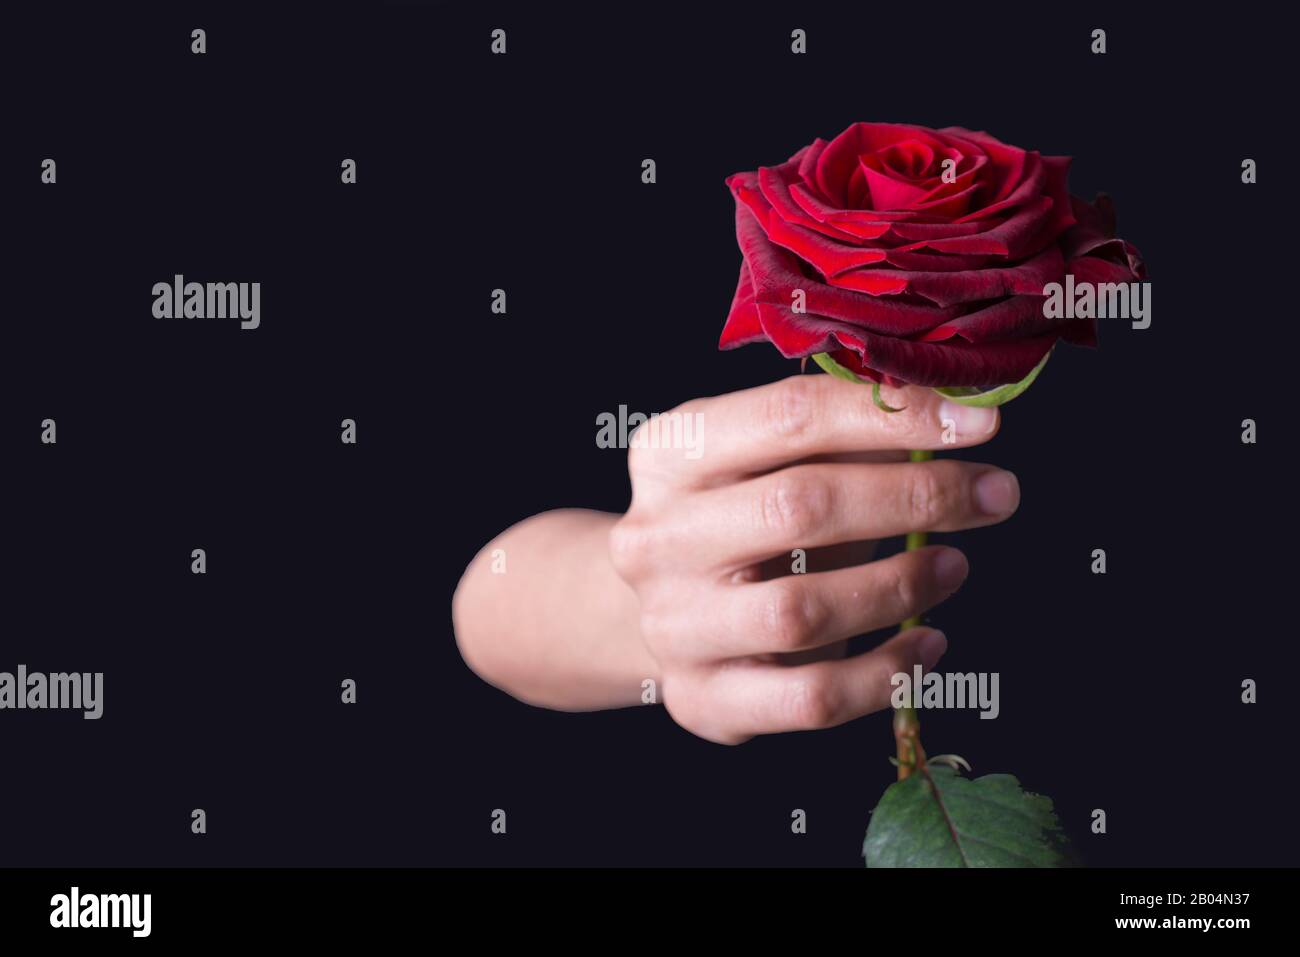 A beautiful red rose with woman's hands female hand holds a red ...